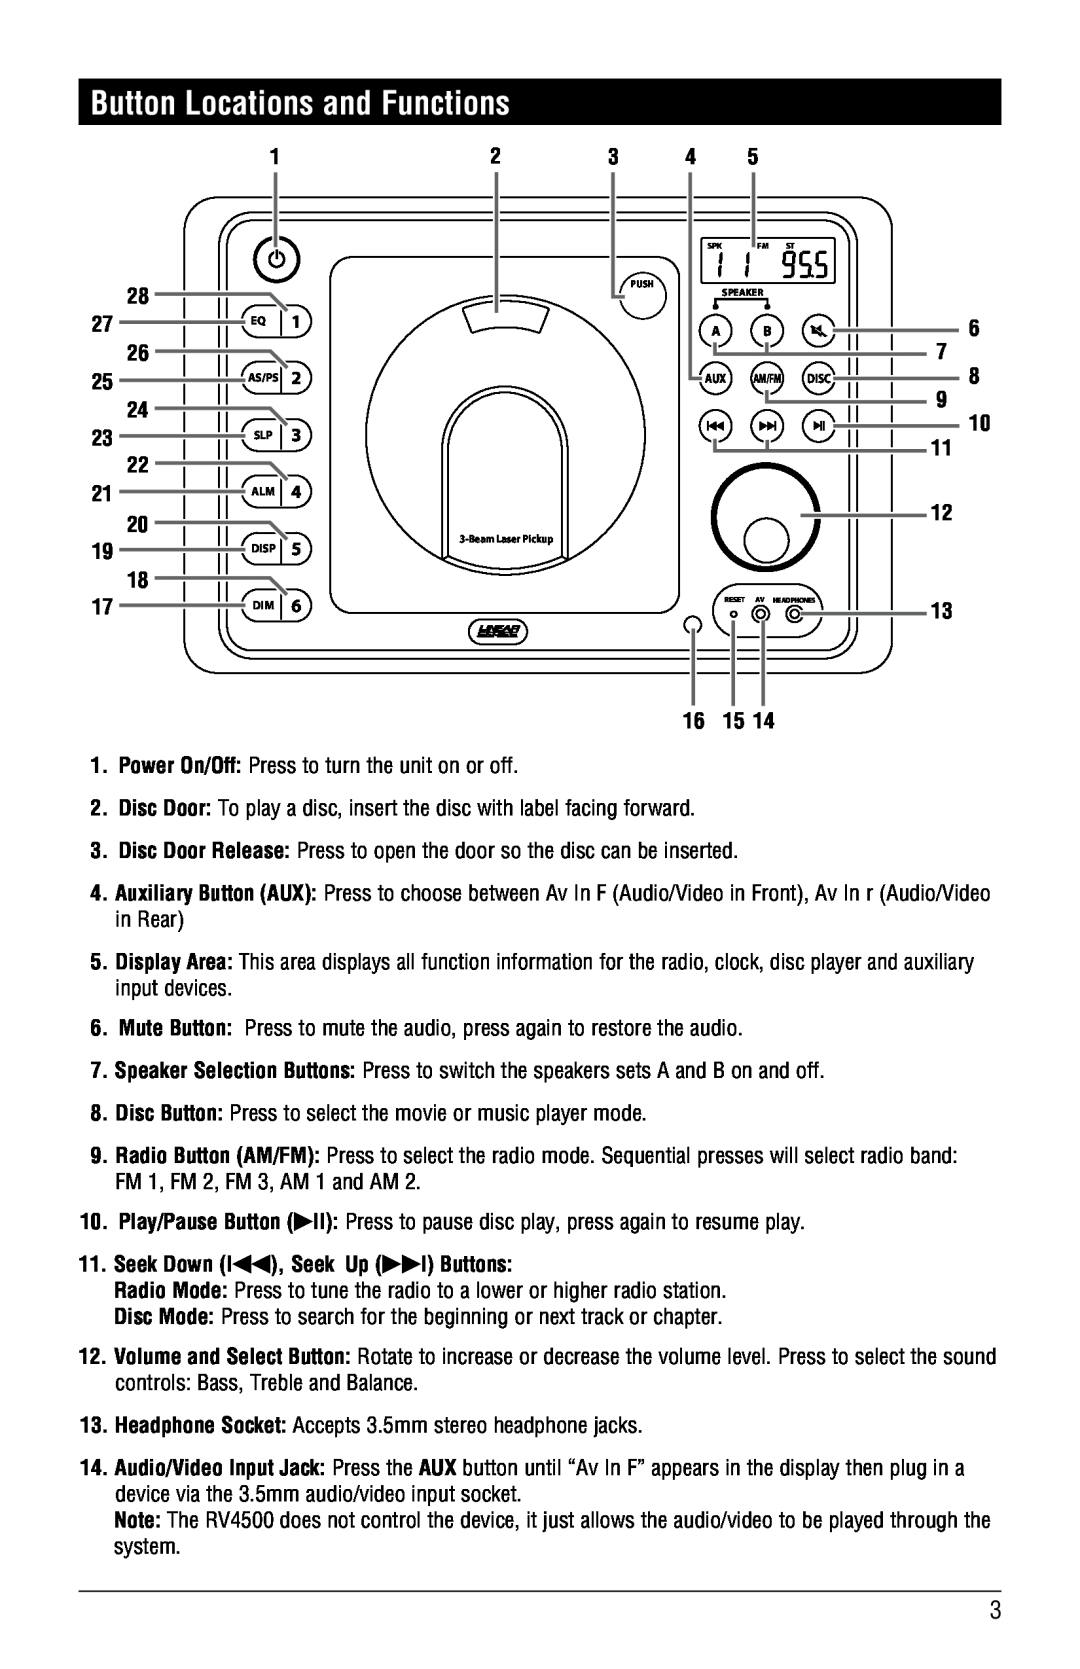 Linear RV4500 installation manual Button Locations and Functions 